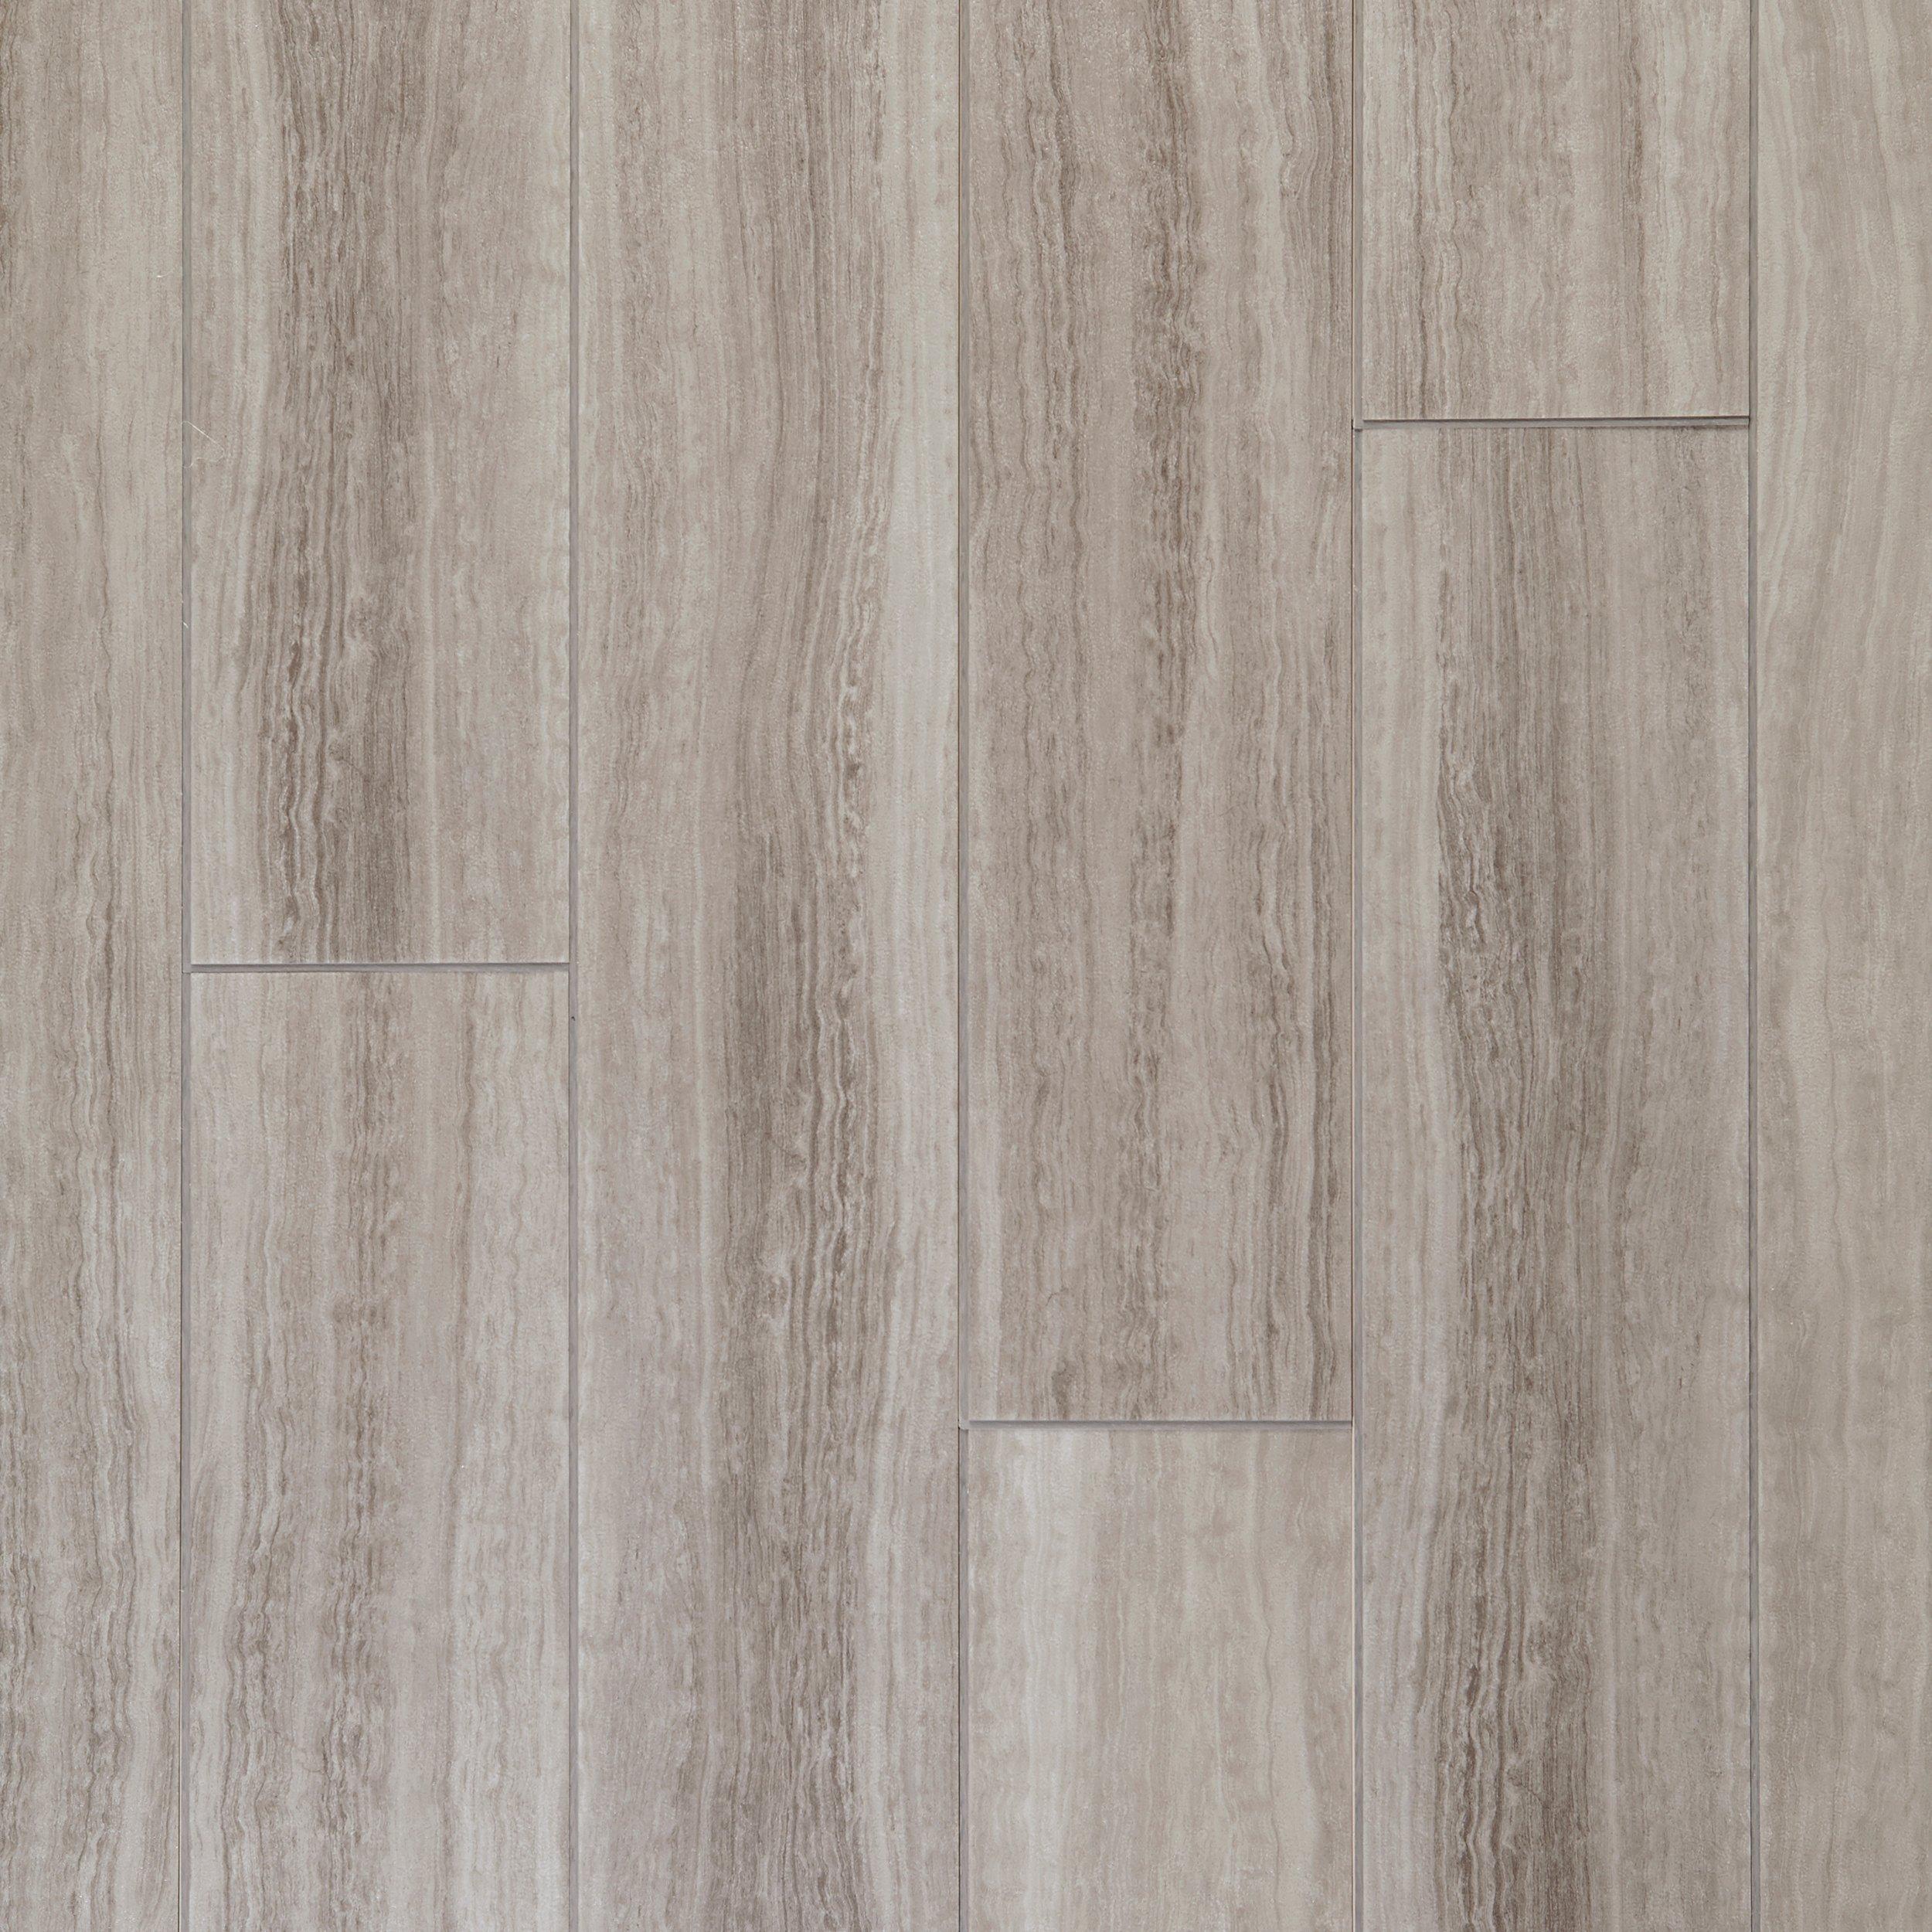 NuCore Gray Tile Plank with Cork Back - 6.5mm - 100376854 | Floor and Decor